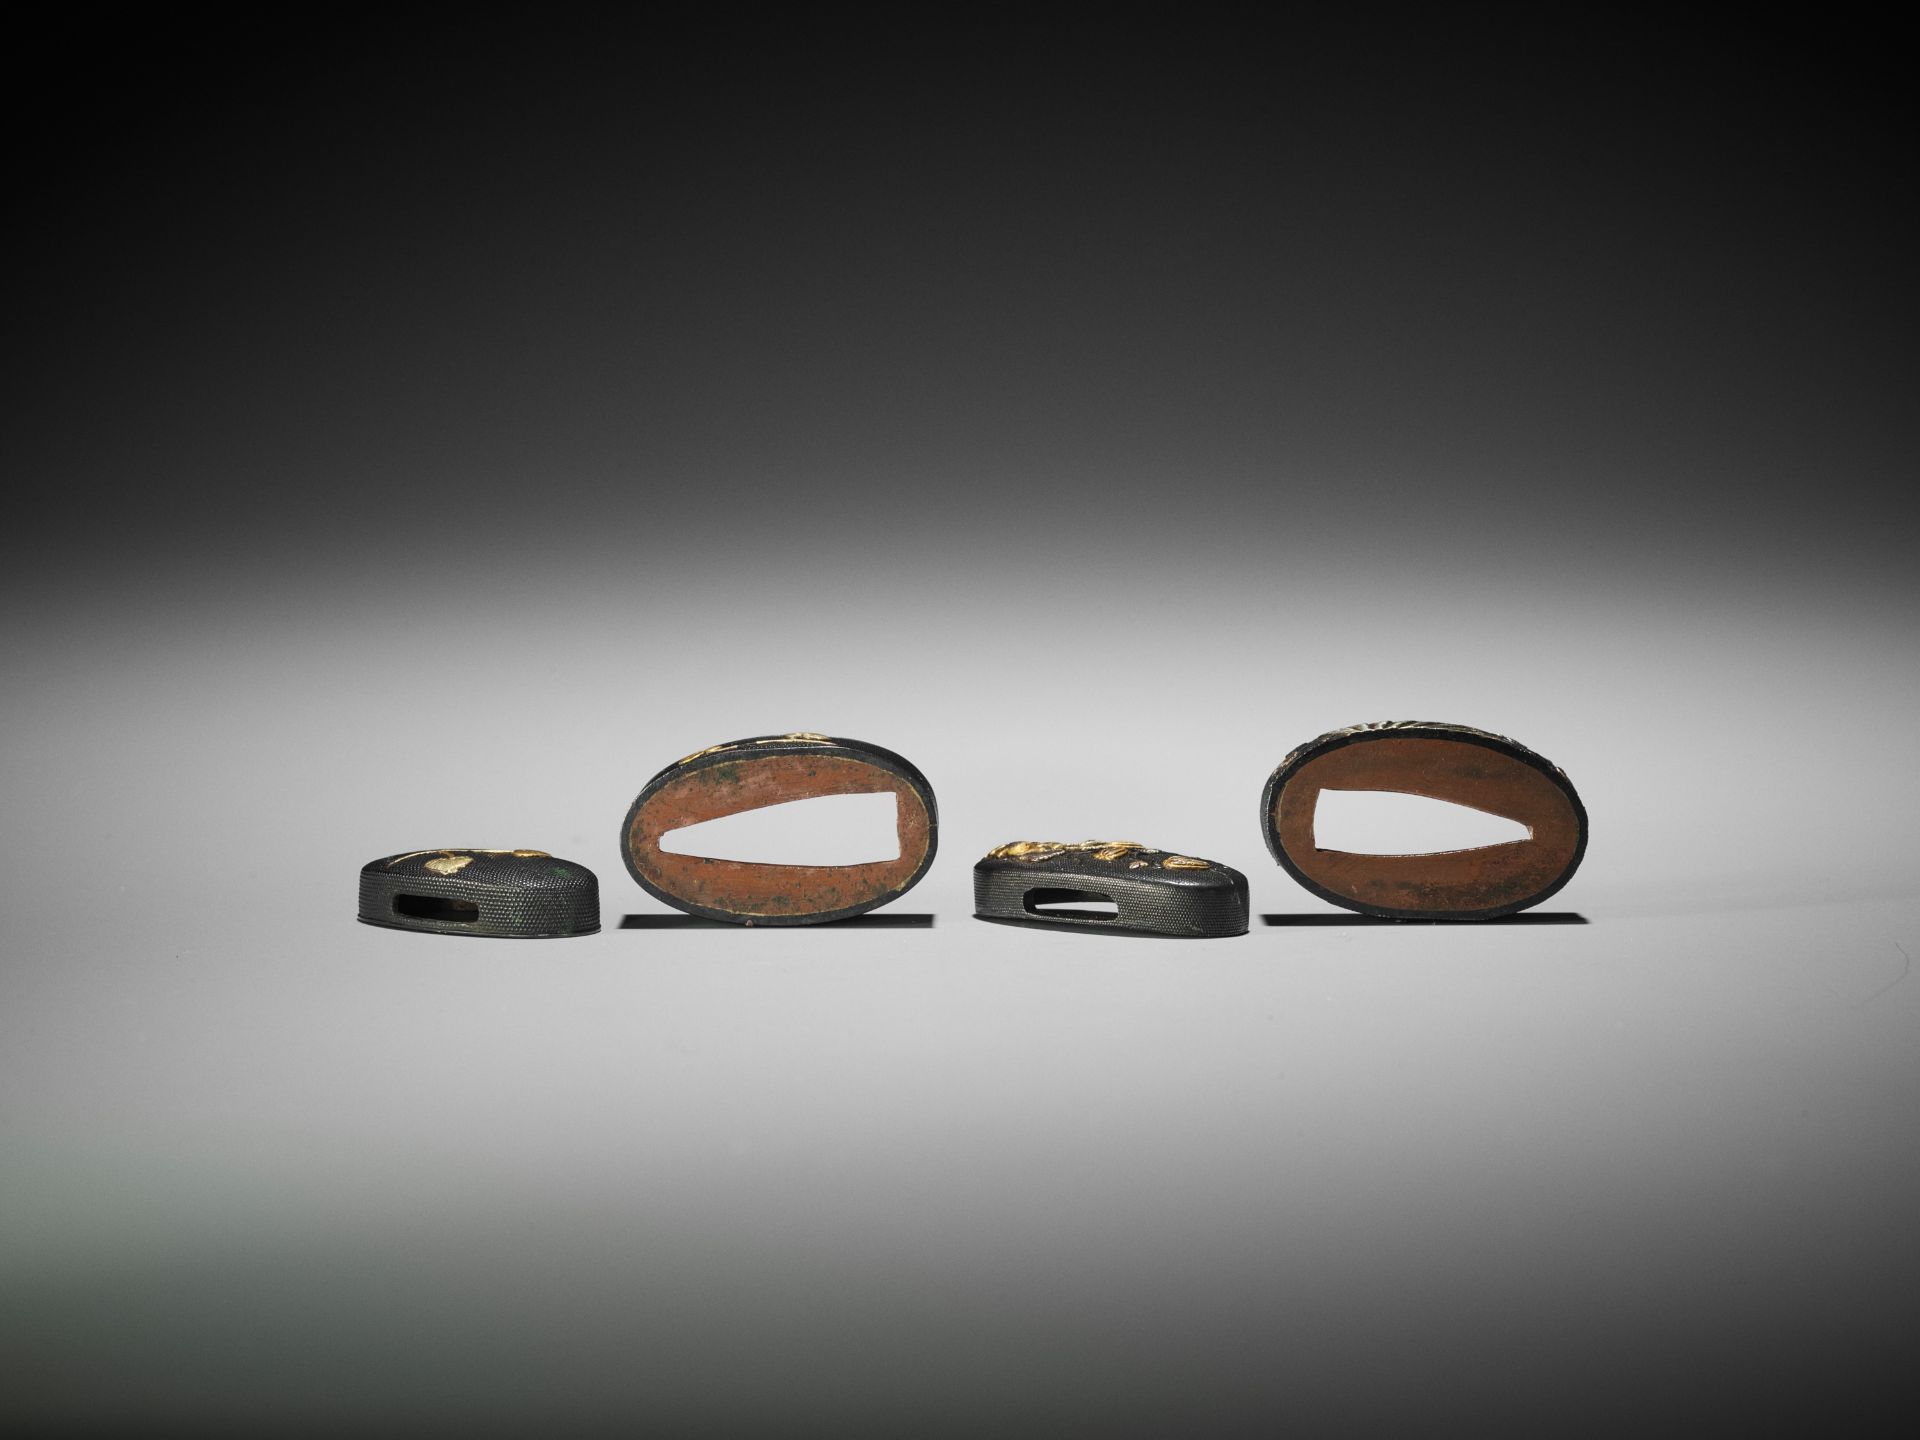 TWO FUCHI AND KASHIRA WITH AOI LEAVES - Image 4 of 4